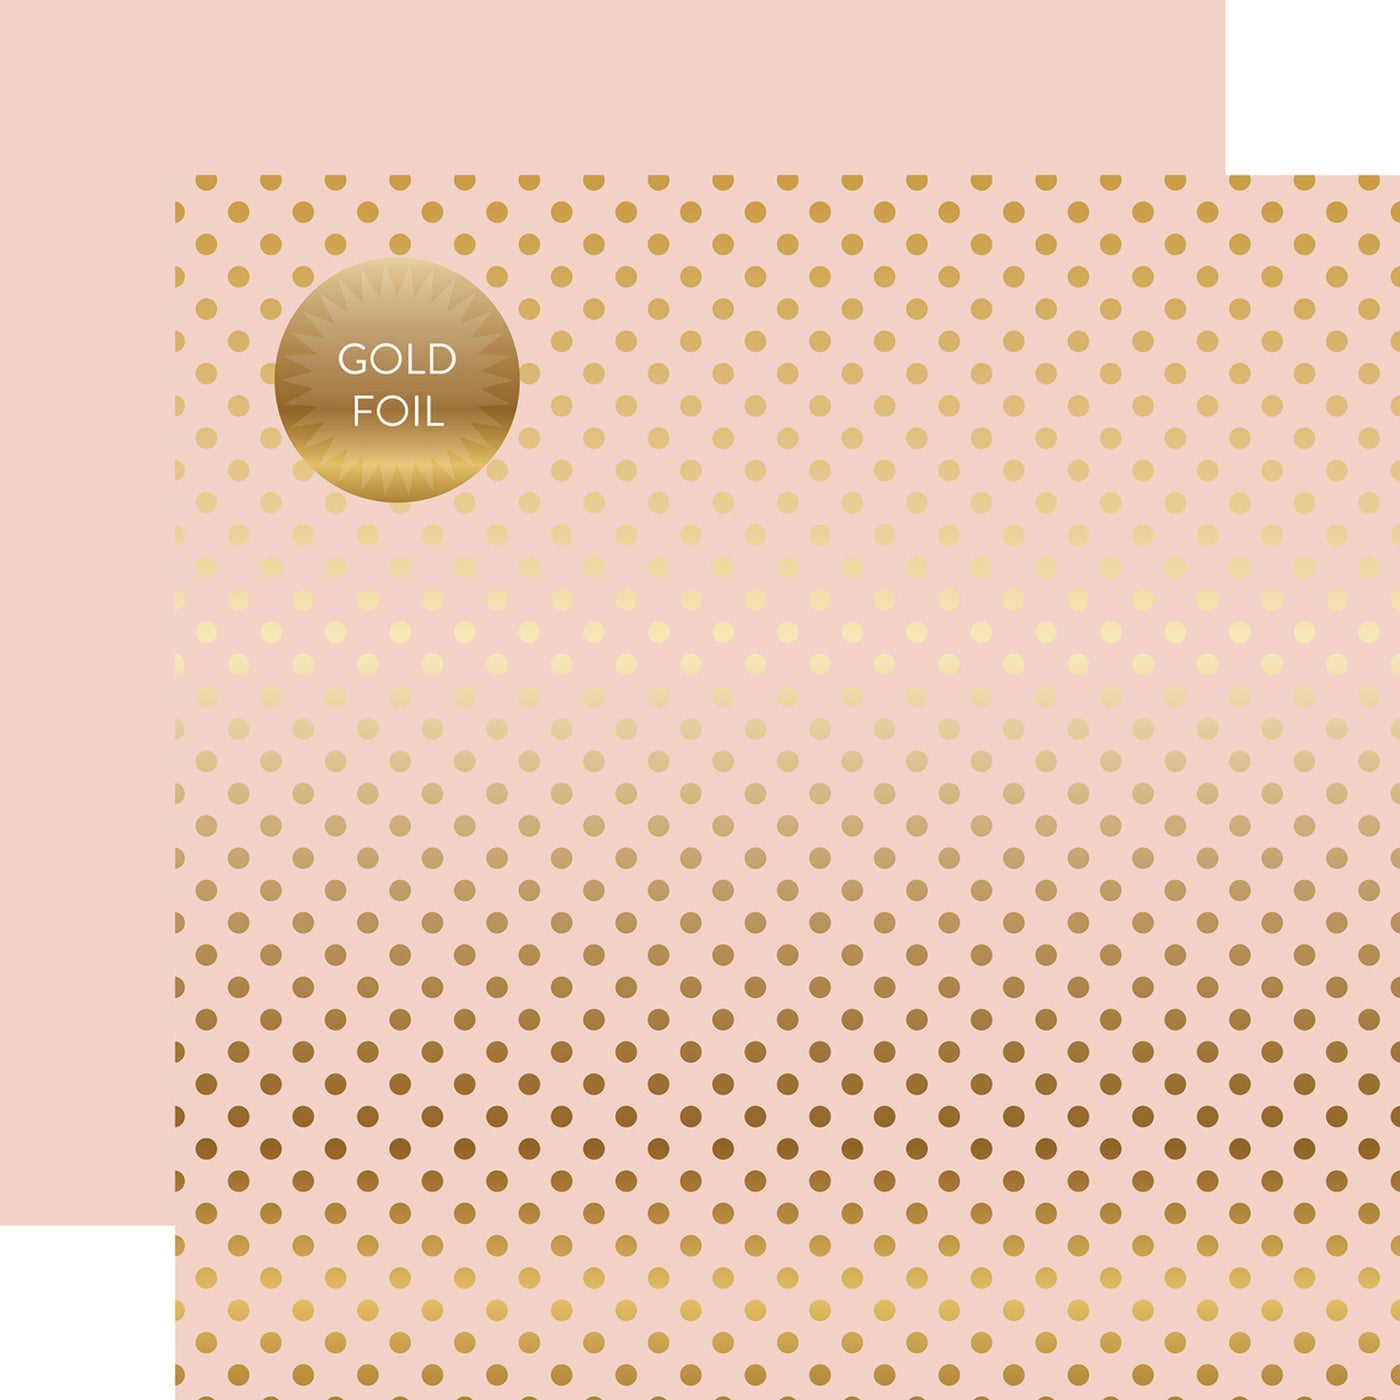 Gold foil dots on pink 12x12 cardstock, plain pink reverse, from Dots & Stripes Collection by Echo Park Paper.